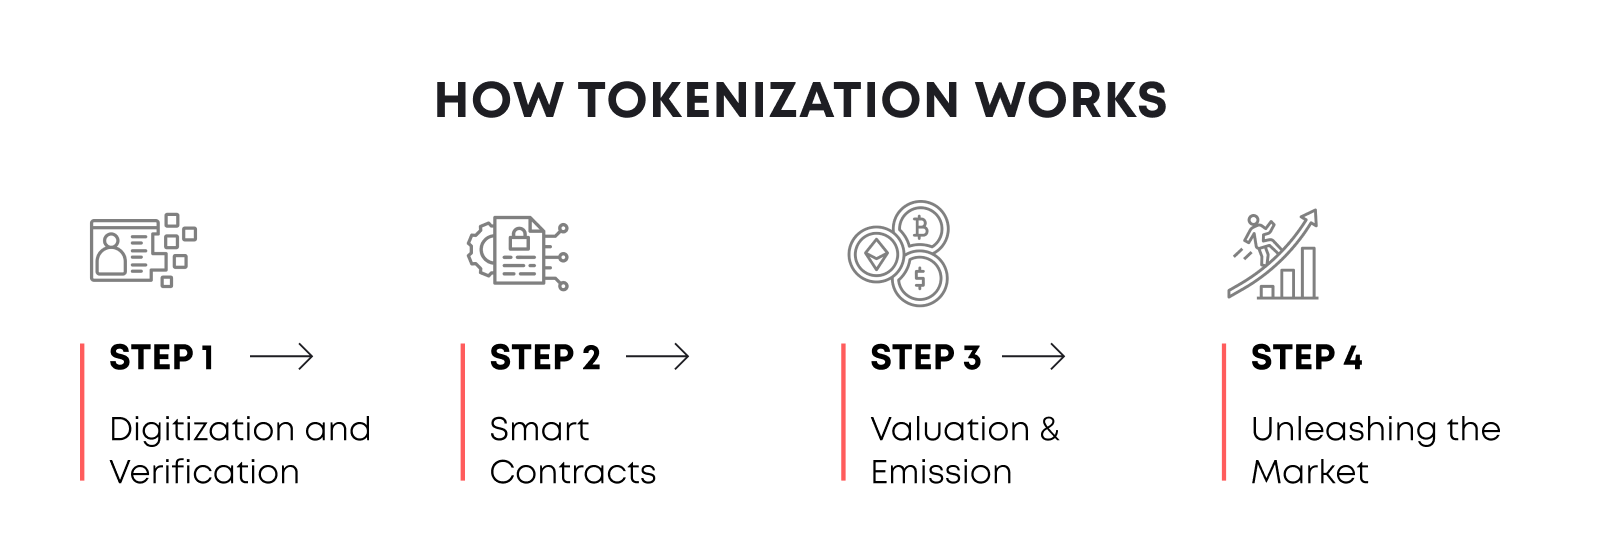 The tokenization process often consists of 4 major steps: Digitization and Verification, Smart Contracts creation, Creating the Tokens and Unleashing the Market.